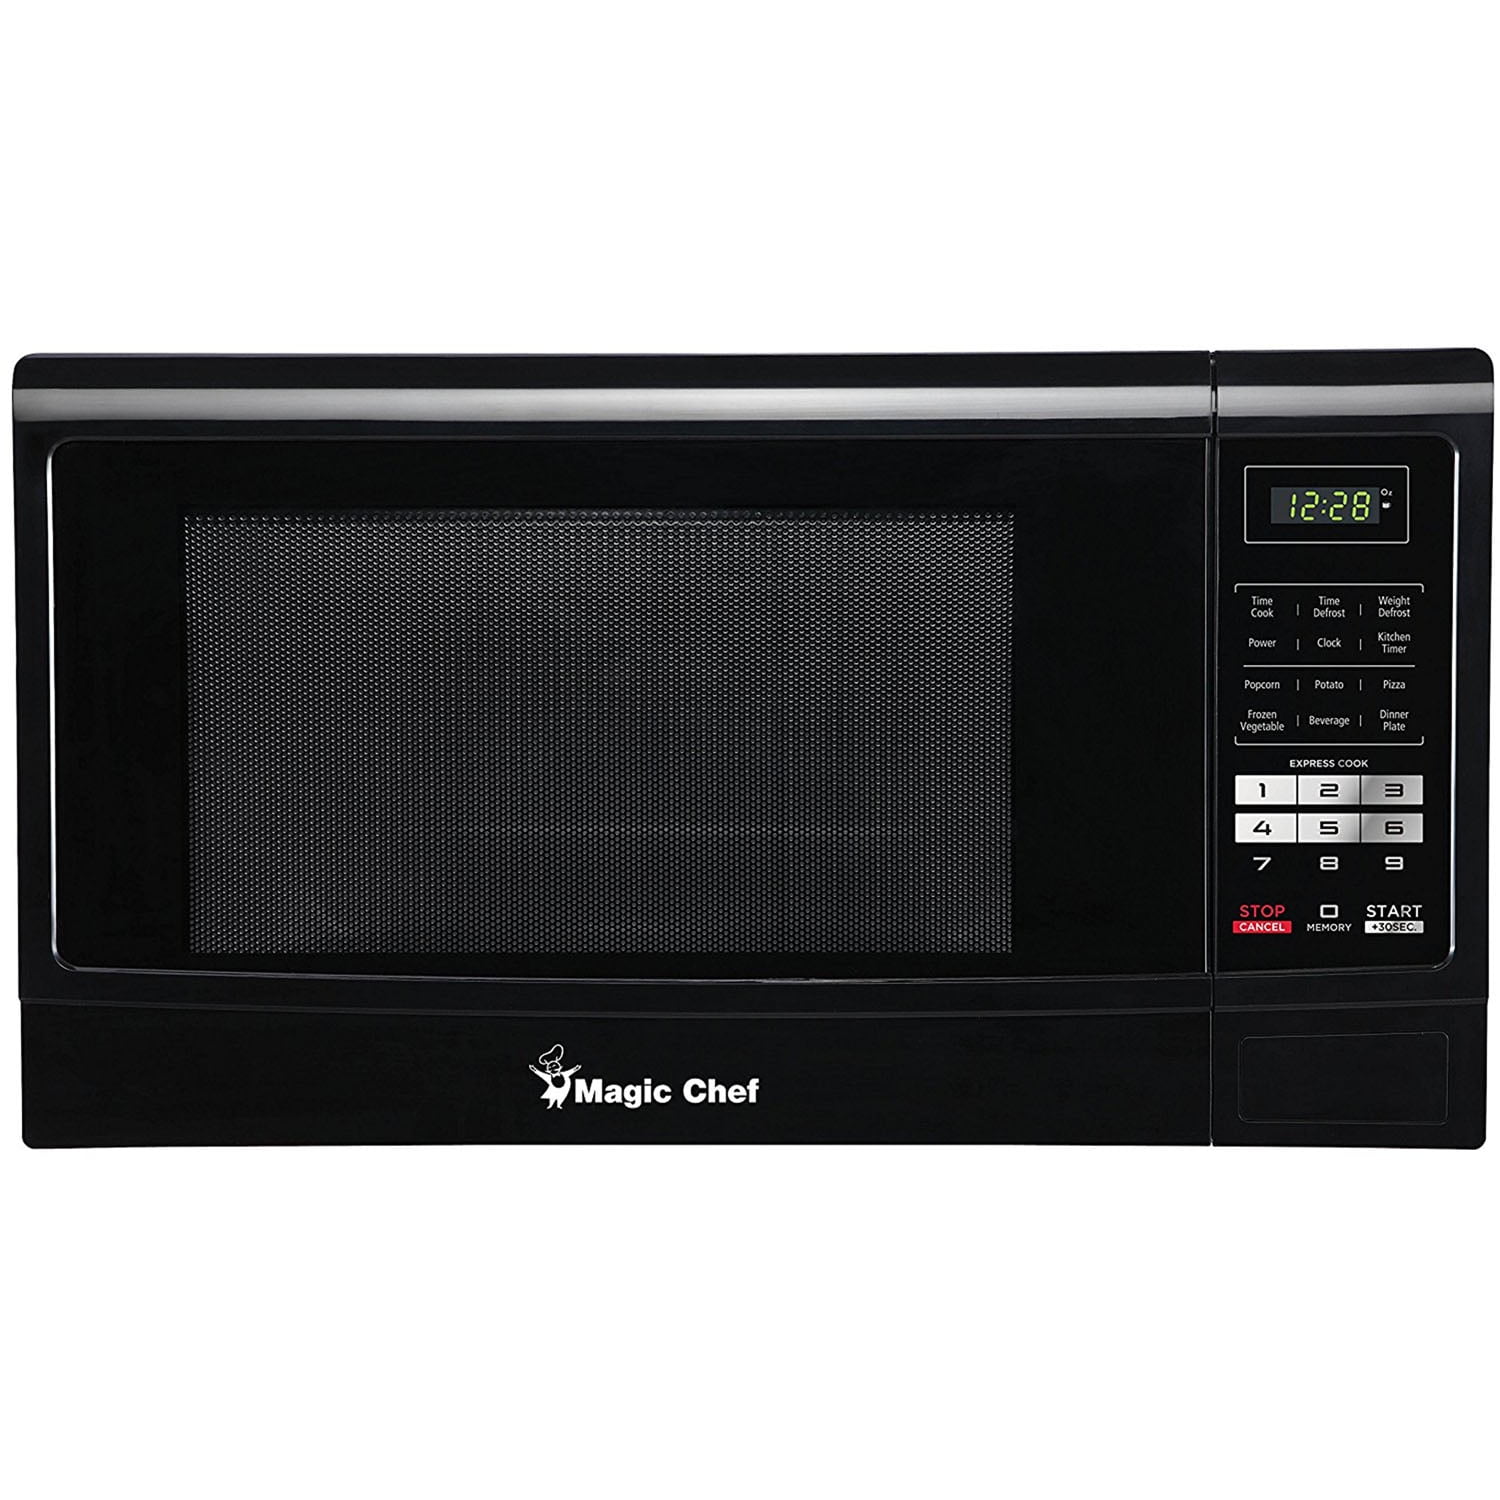 Magic Chef 1.6 Cu. Ft. 1100W Countertop Microwave Oven with Push-Button ...